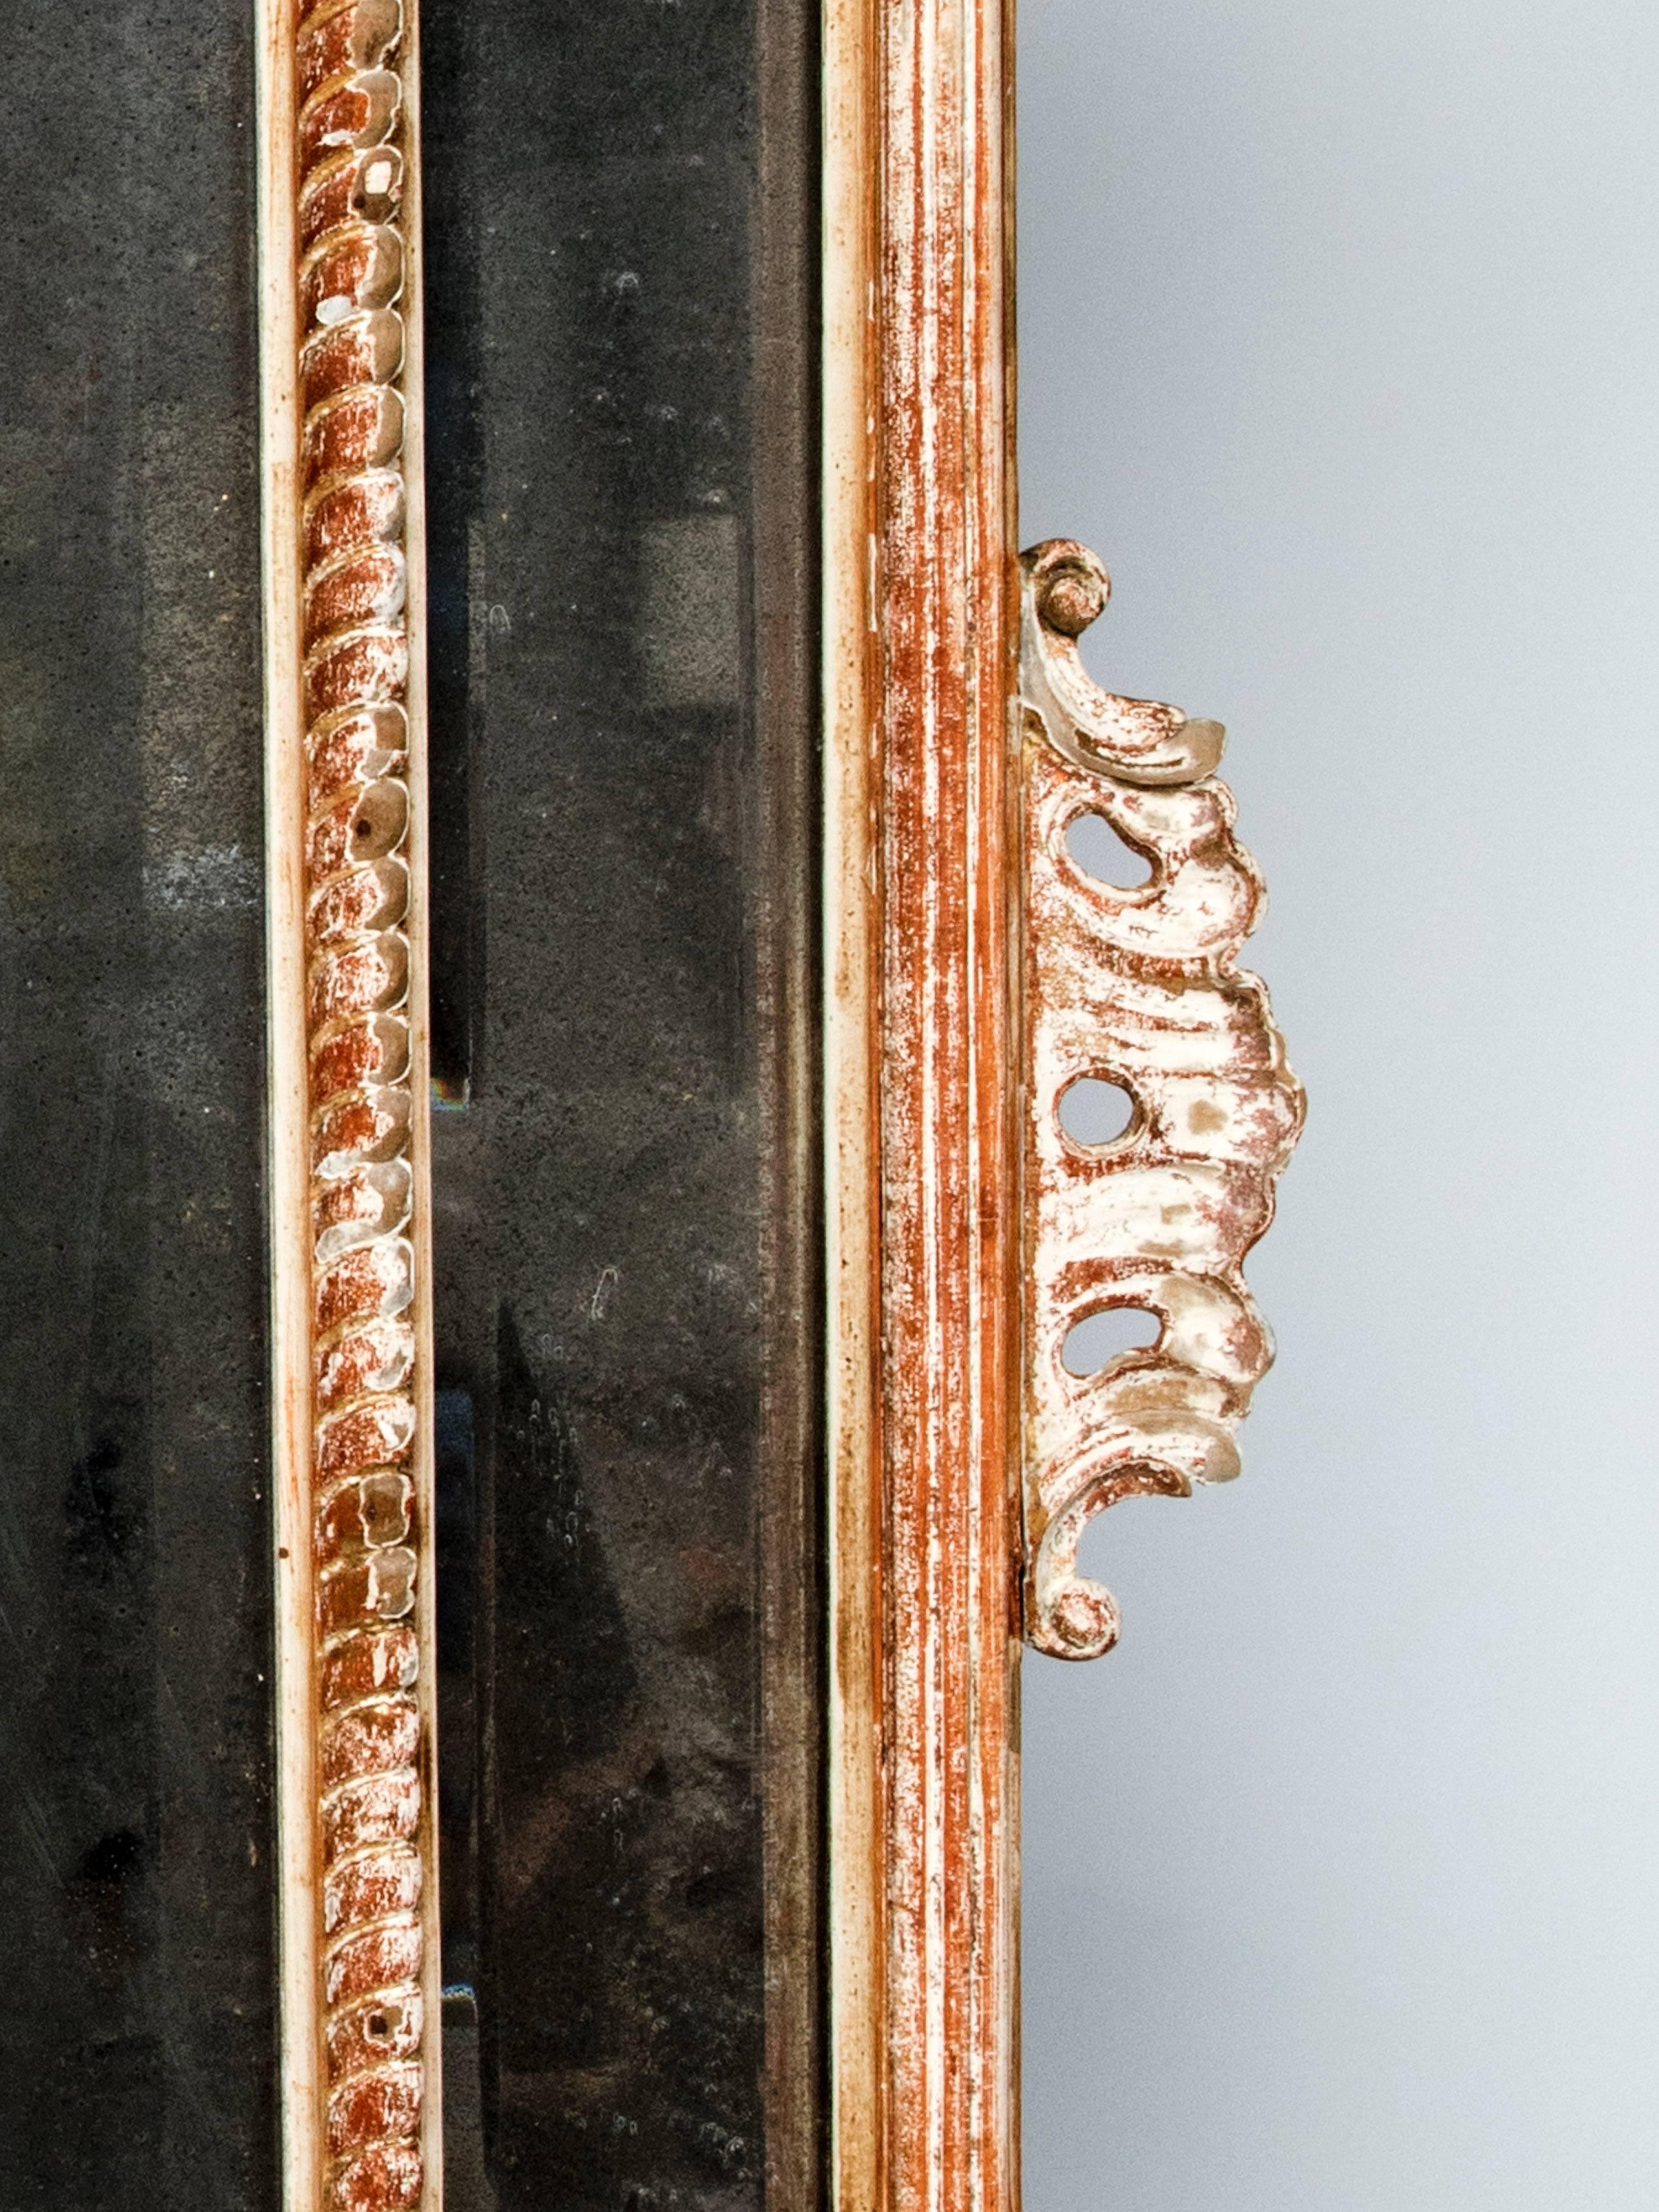 A very nice large carved wood mirror, mirror itself is very frosted.
Superb carved shell to the top, very decorative.
Gold leaf in parts has wear.